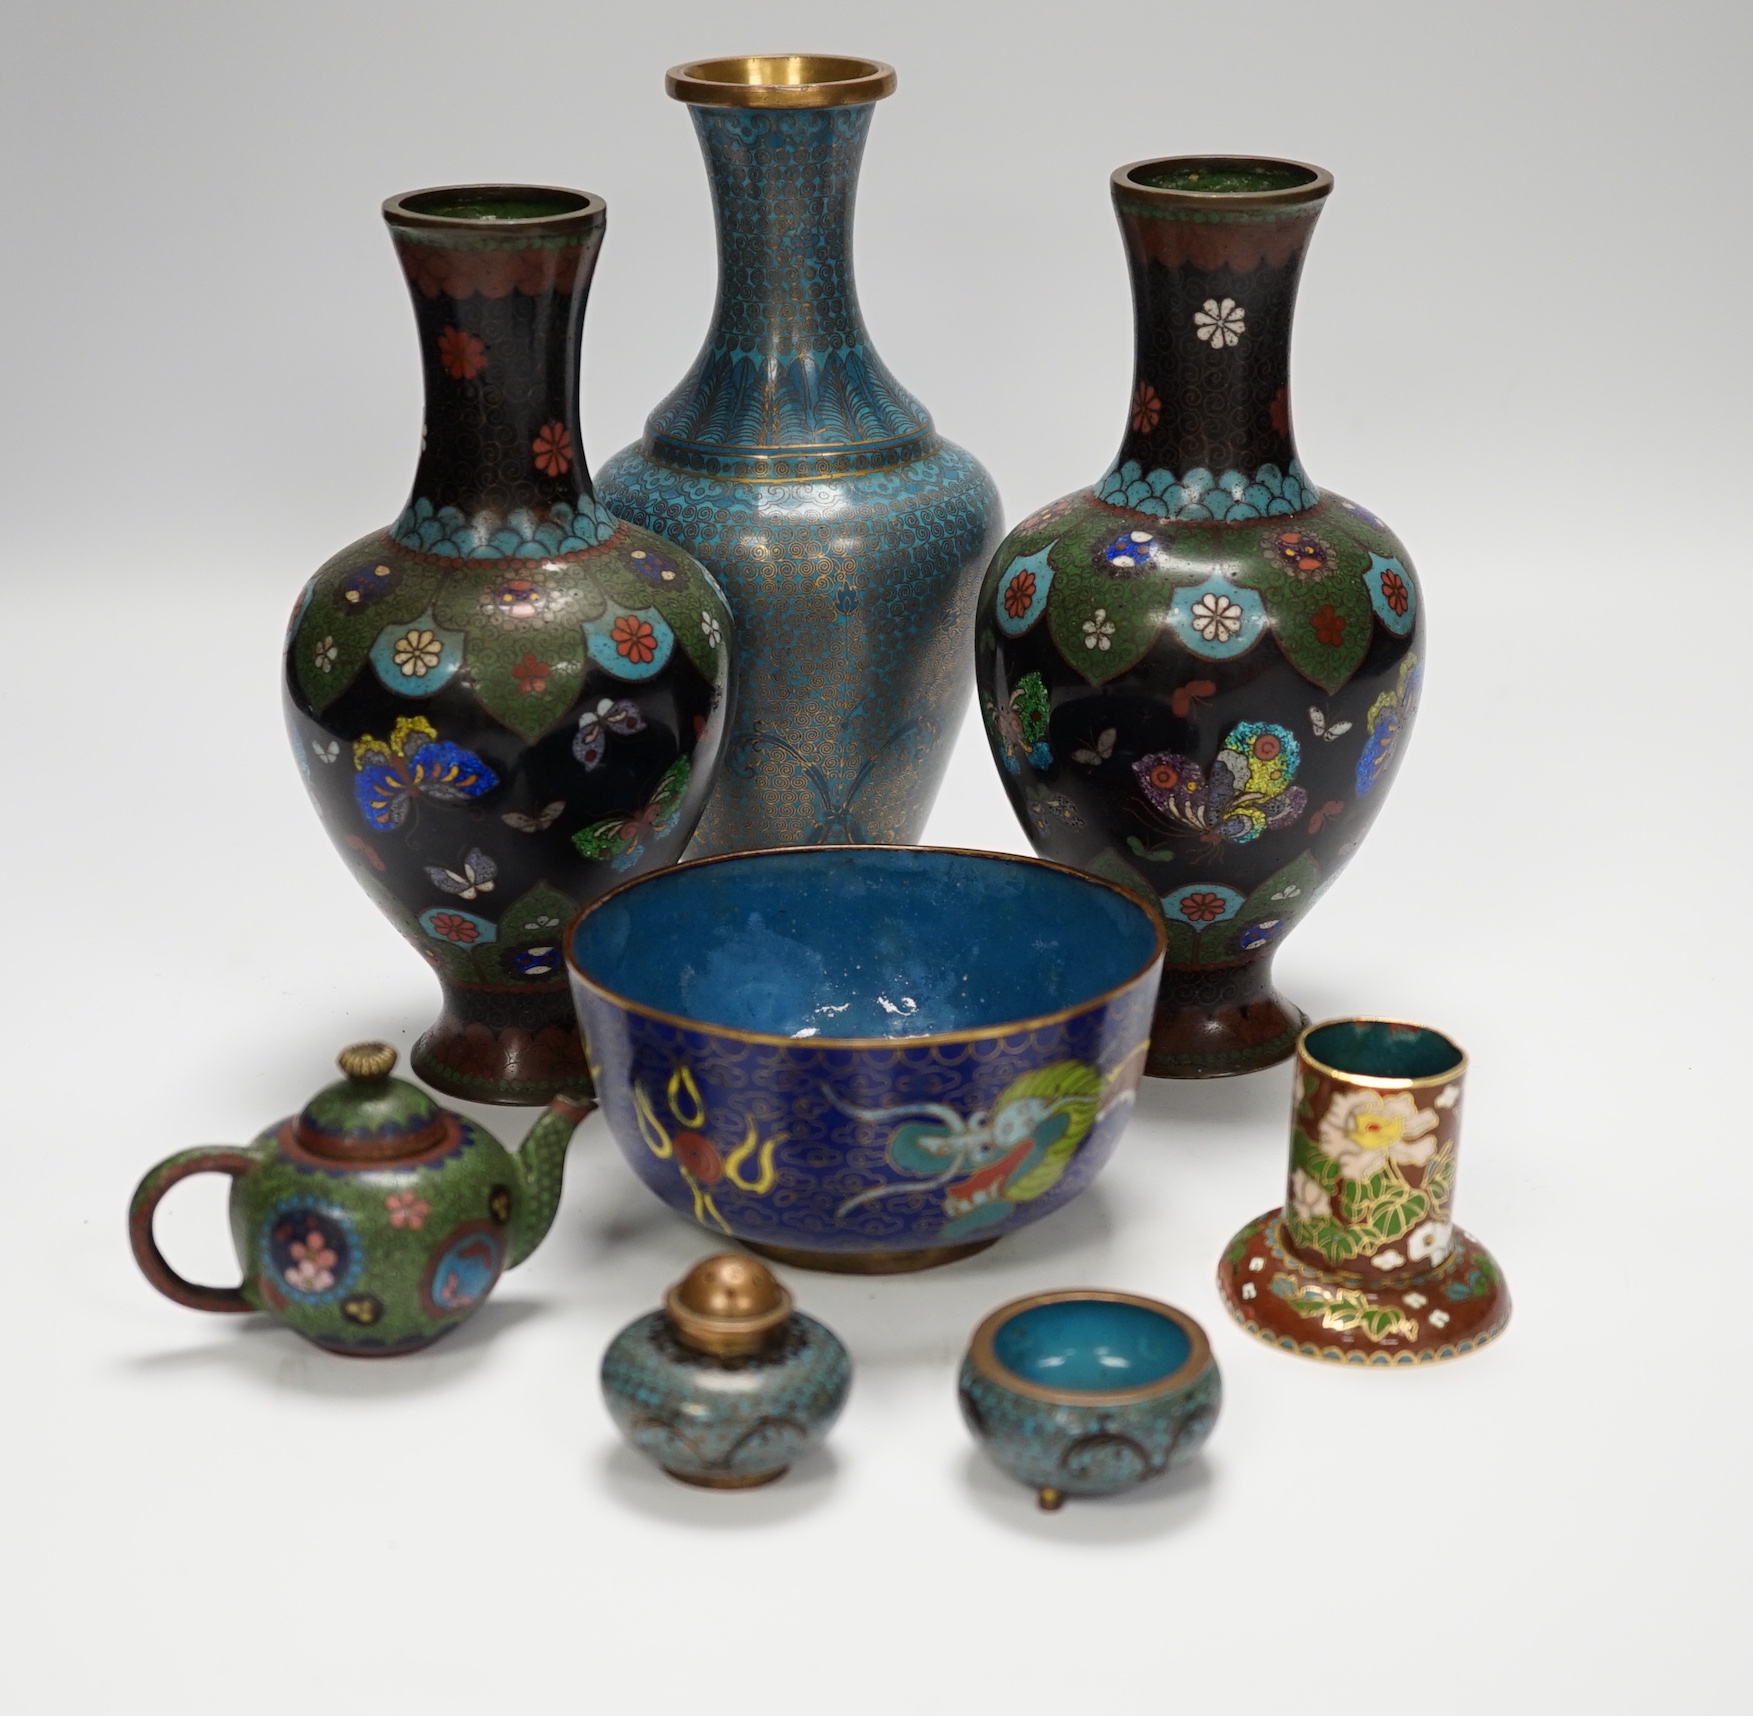 A collection of Chinese and Japanese cloisonné enamel pieces, including five vases, a ginger jar and cover, three bowls, a miniature teapot, napkin rings, etc. (19)